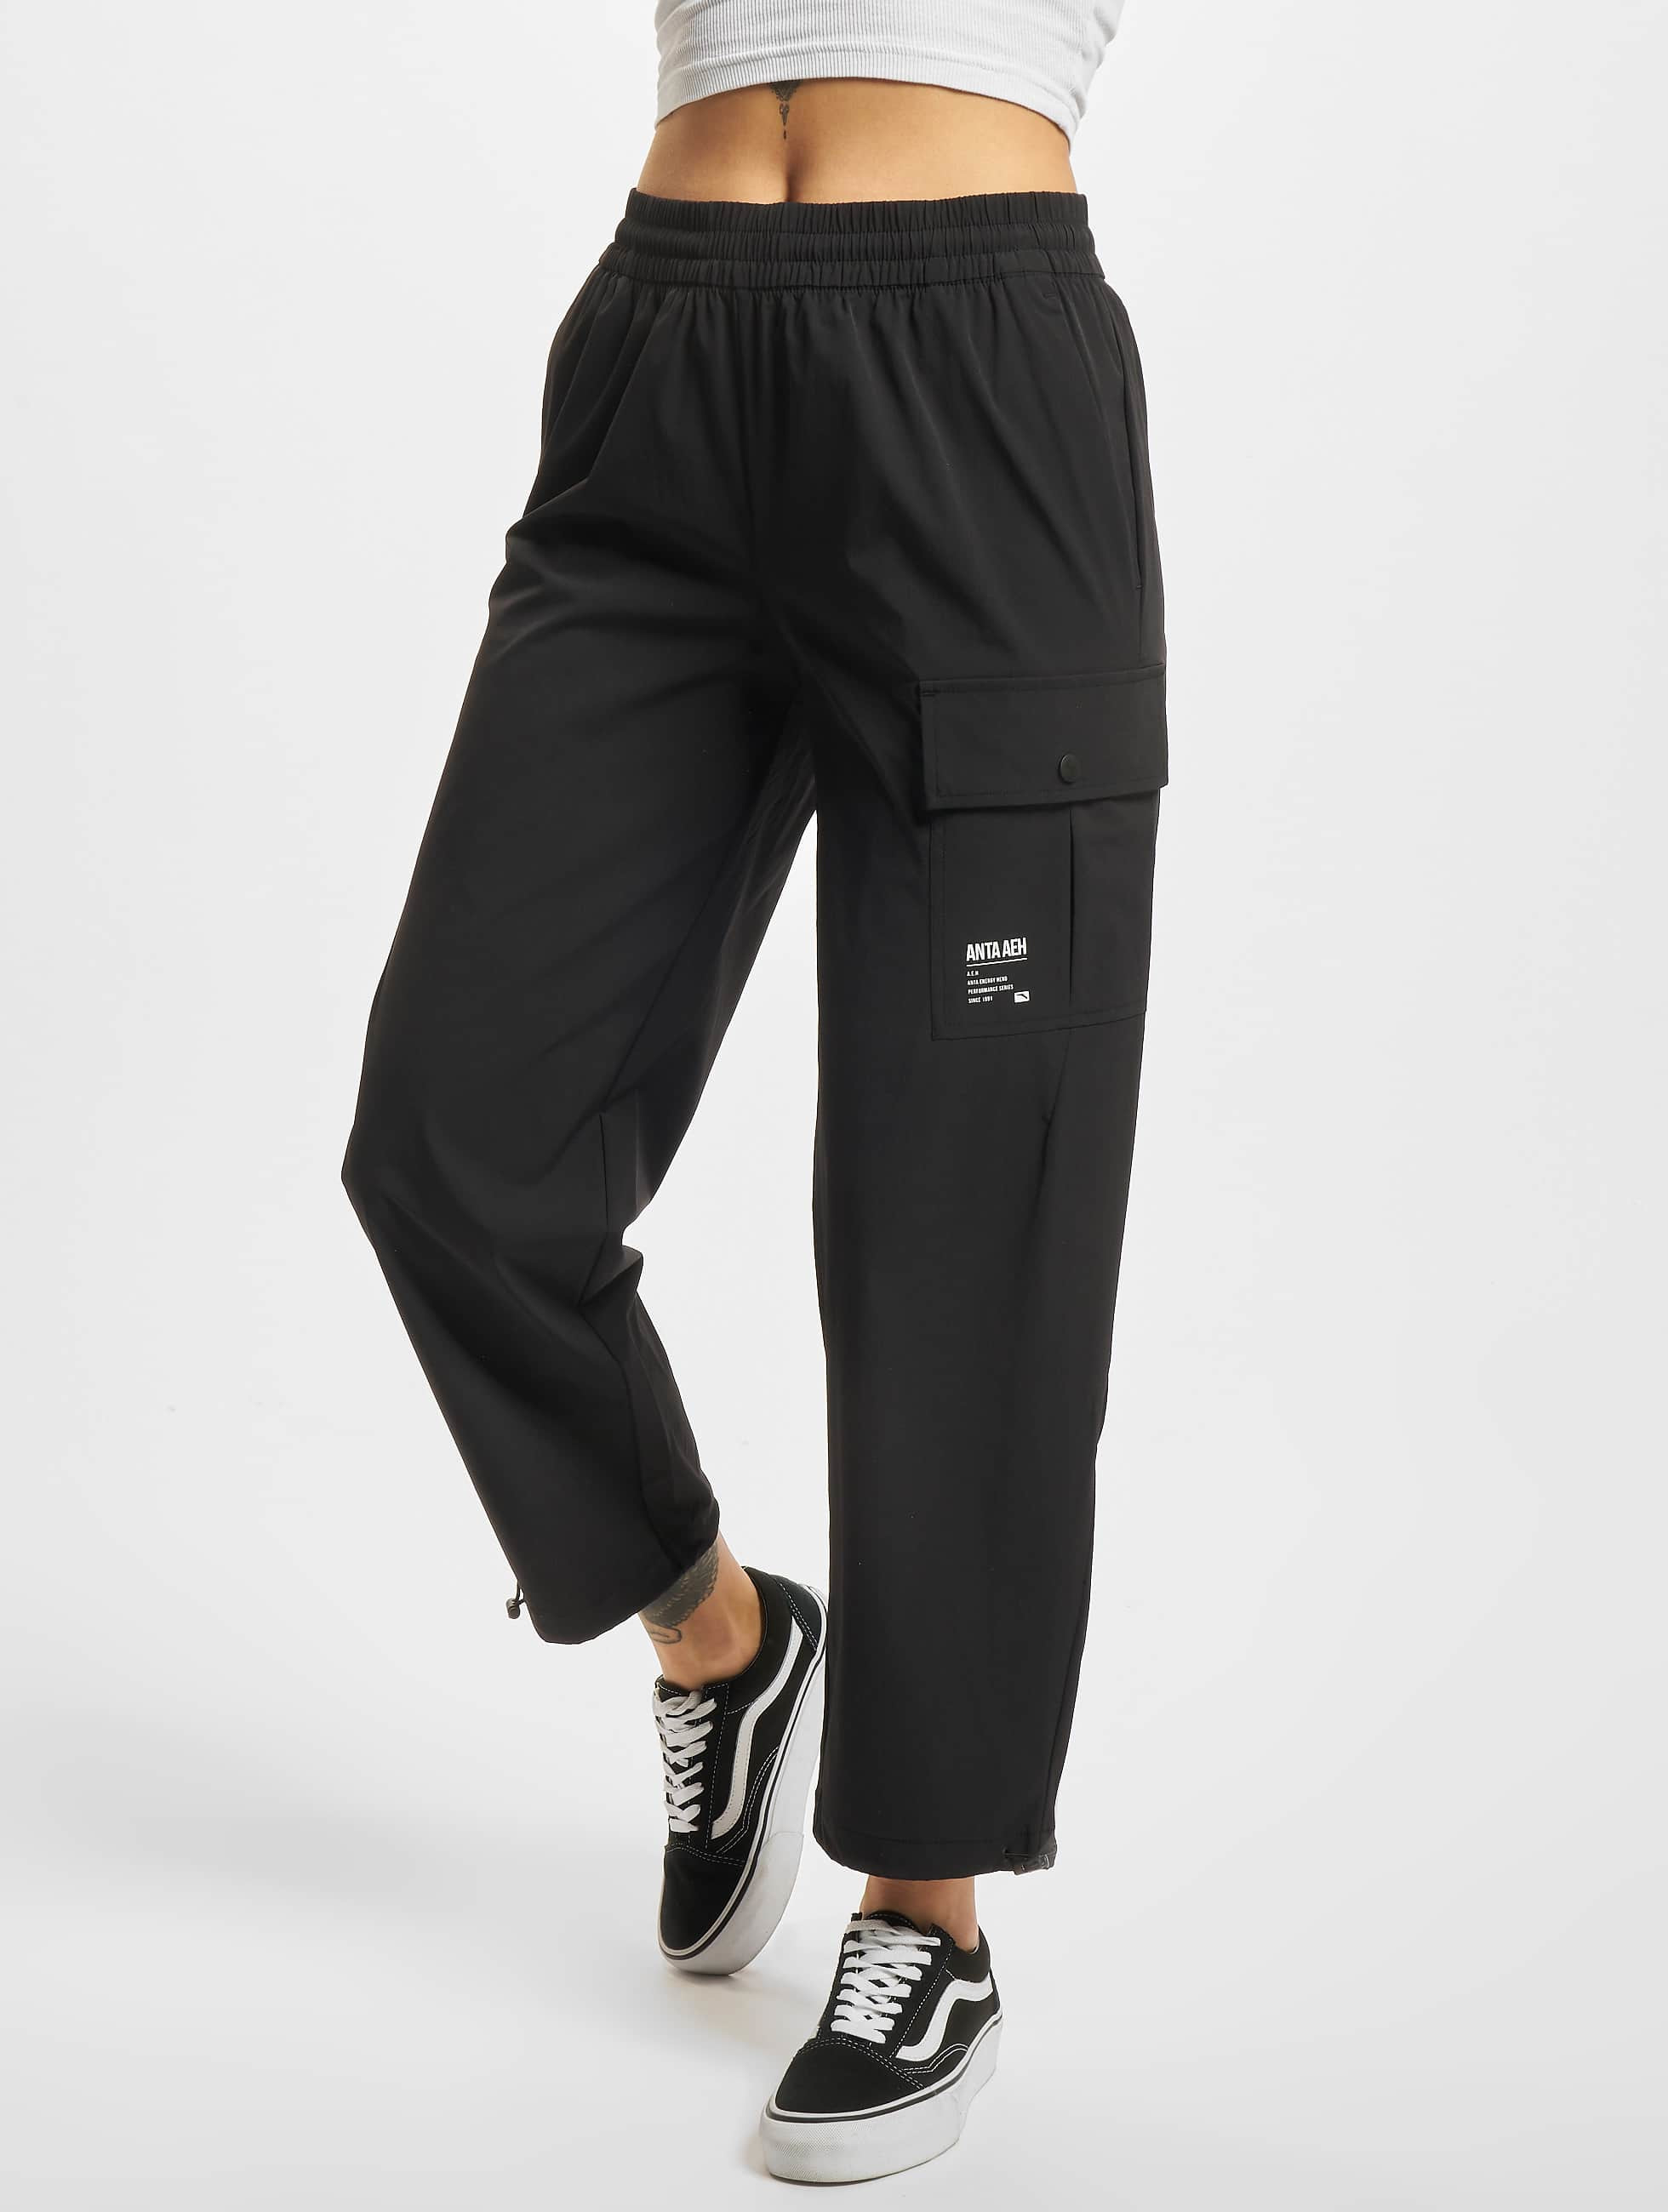 Anta Pant / Sweat Pant Woven Ankle in black 865475